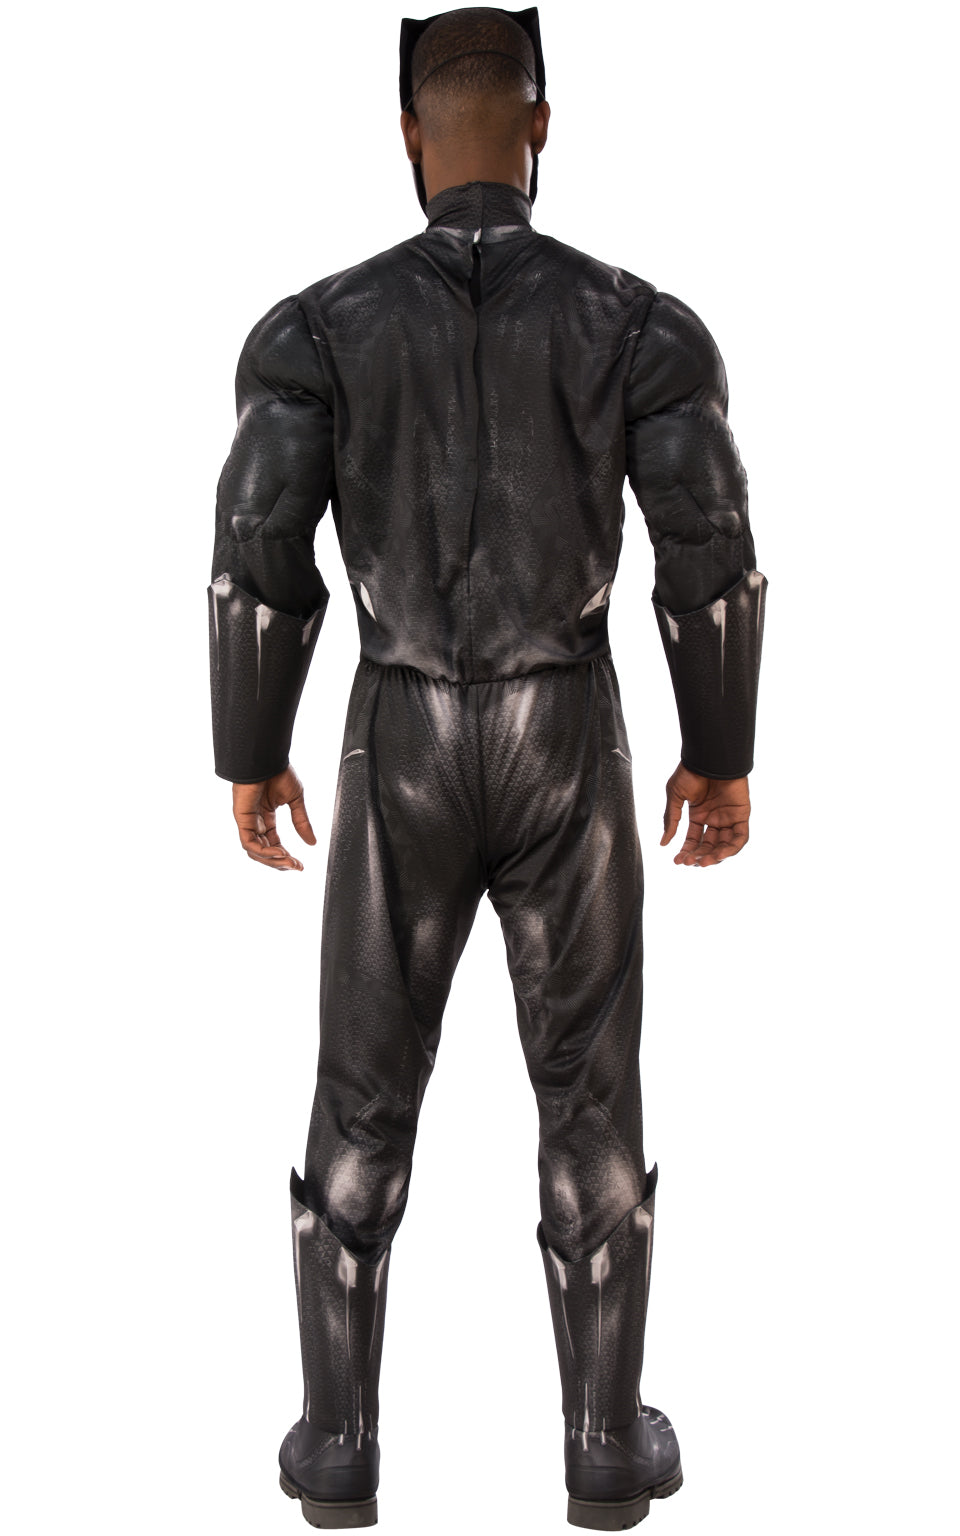 Deluxe Black Panther Muscle Costume